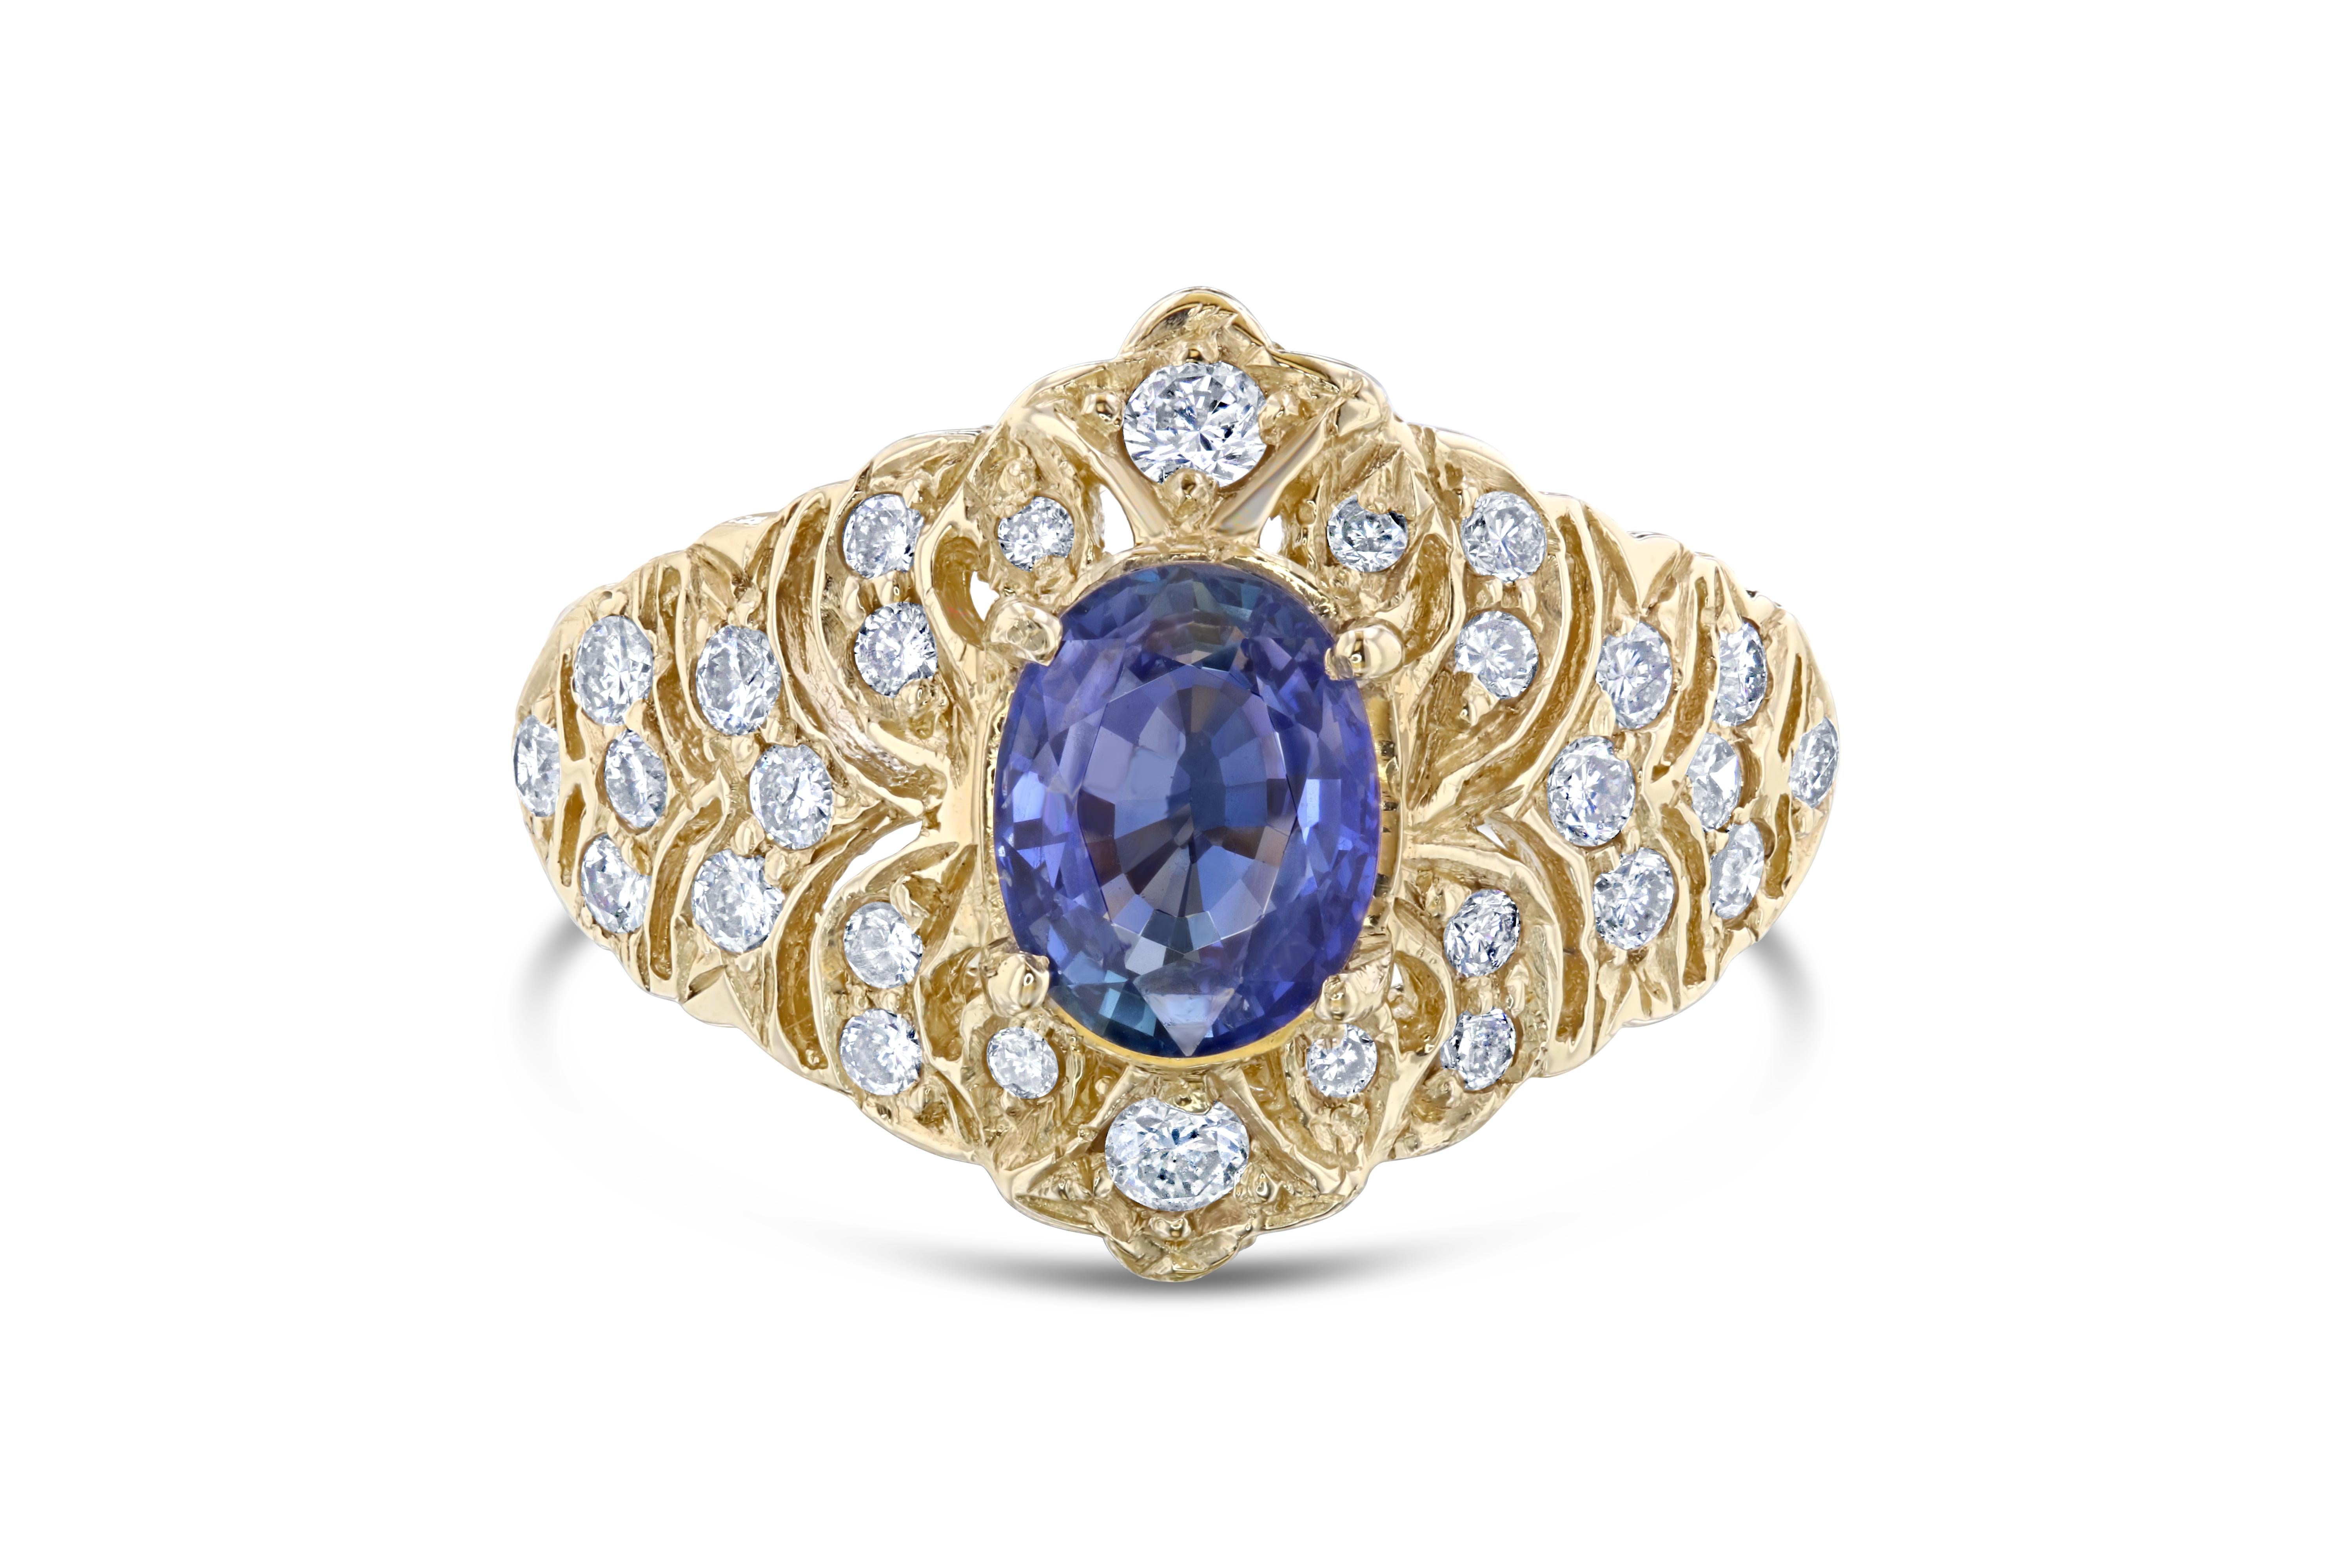 This unique ring is a Vintage-Inspired ring. It's beauty derives from the stunning Blue Sapphire that weighs 1.58 Carats and is adorned by 28 Round Cut Diamonds weighing 0.57 Carats. The total carat weight is 2.15 Carats. 

The Oval Cut Sapphire is